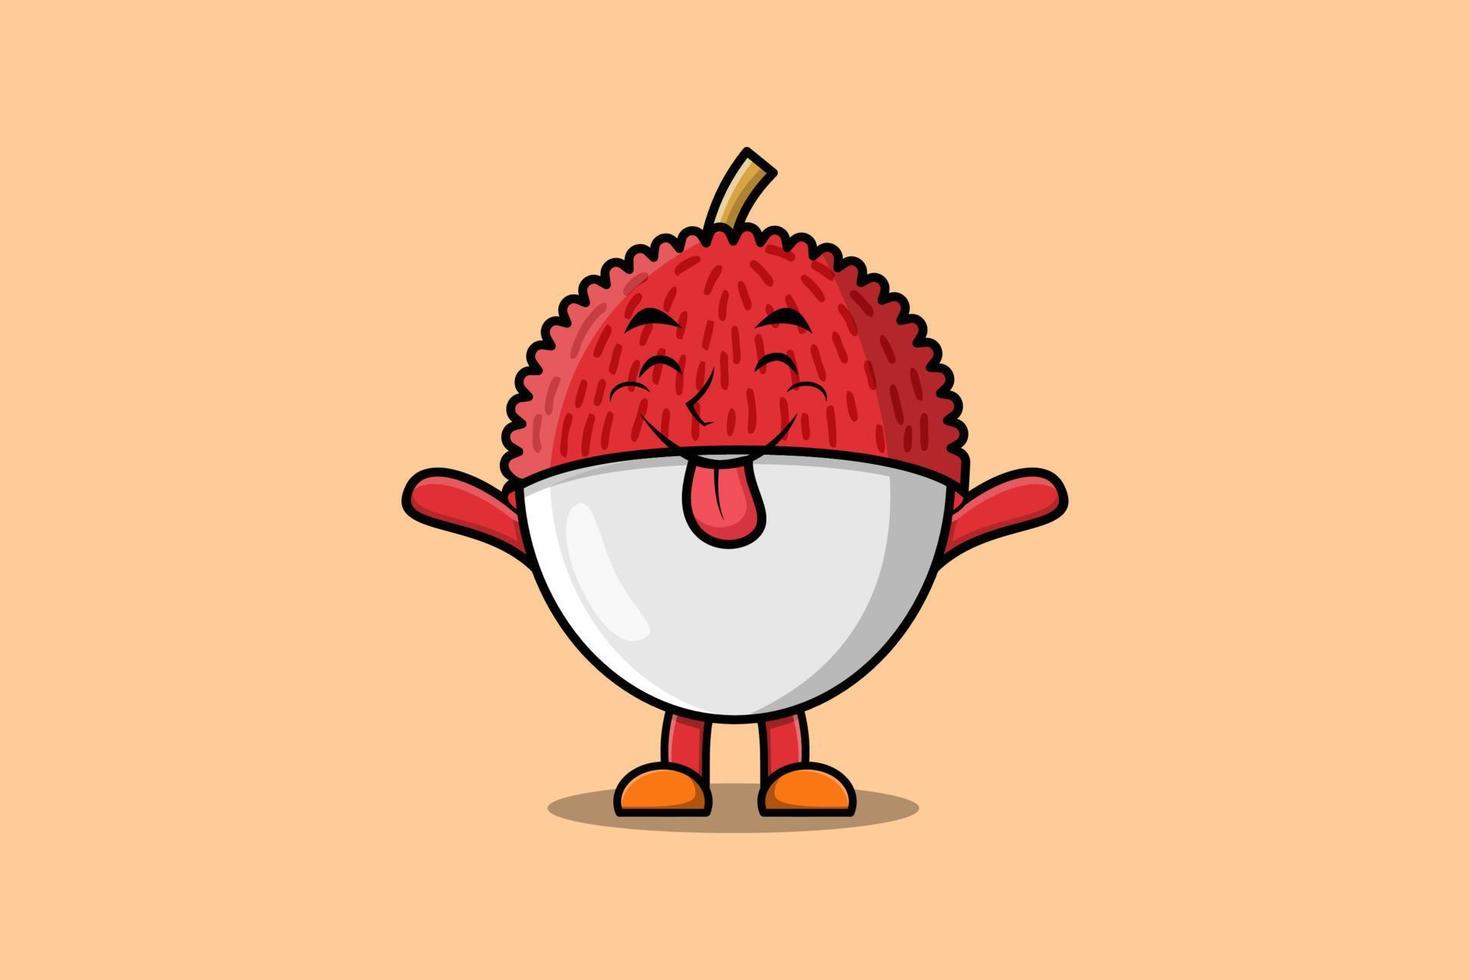 Cute cartoon Lychee with flashy expression vector